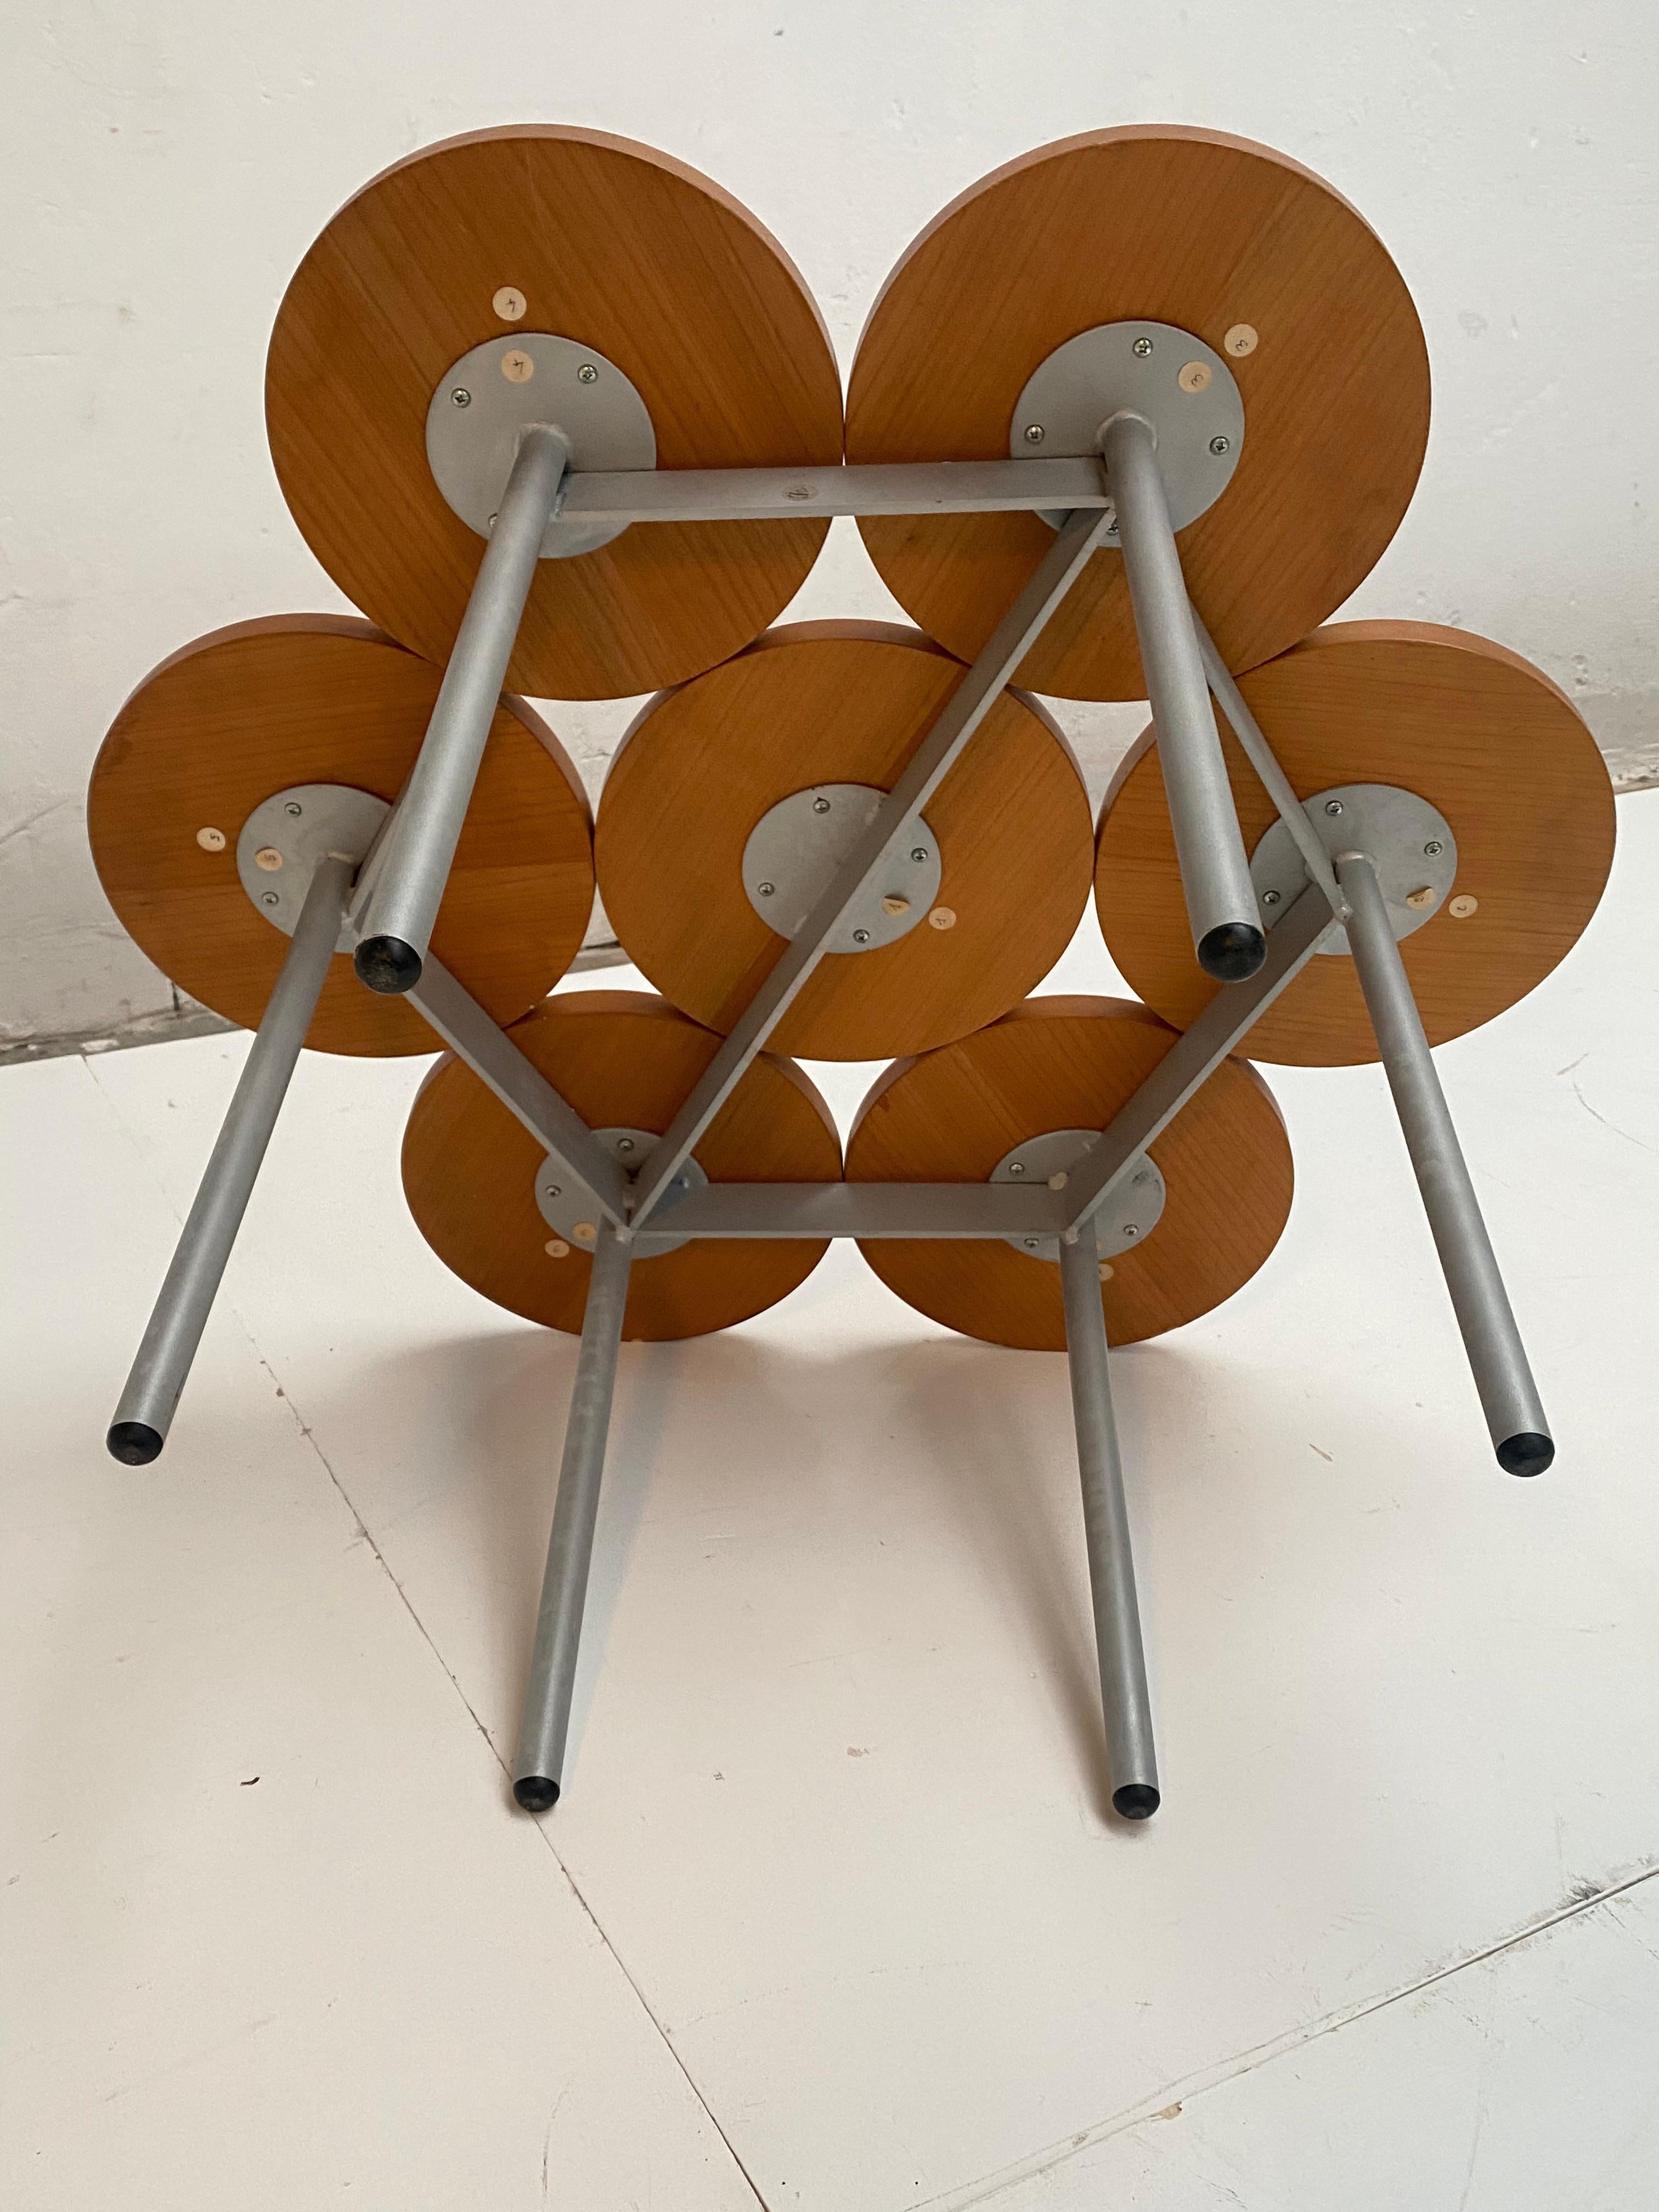 Metal Contemporary Italian 'Flower' Shaped Side Table 'Progetti' Made in Italy 2000's  For Sale